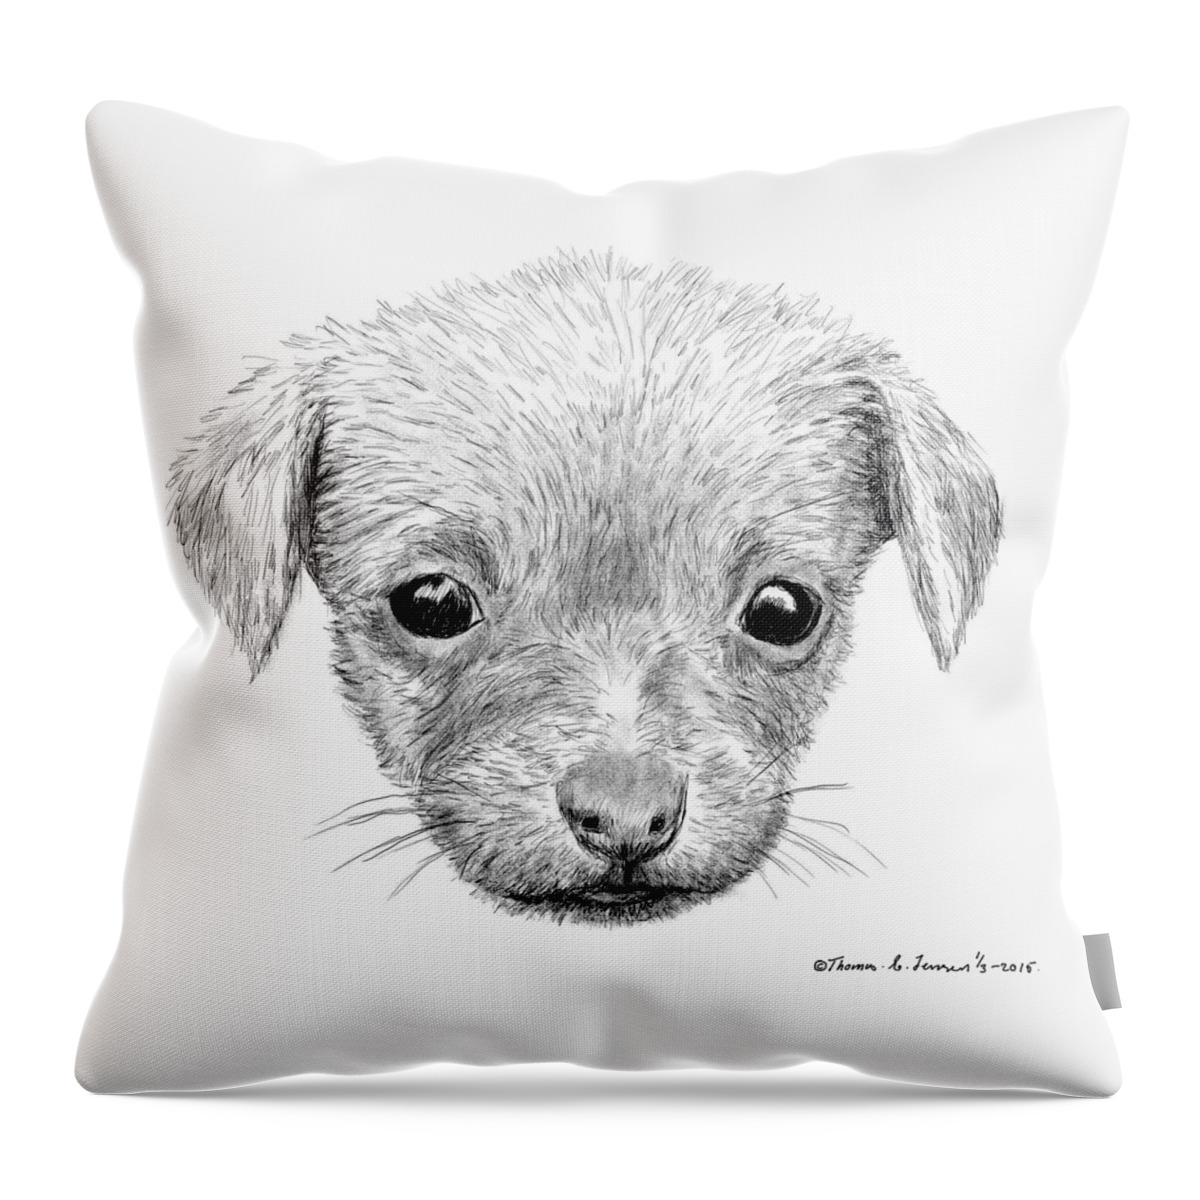 Sketch Throw Pillow featuring the digital art Puppy by ThomasE Jensen